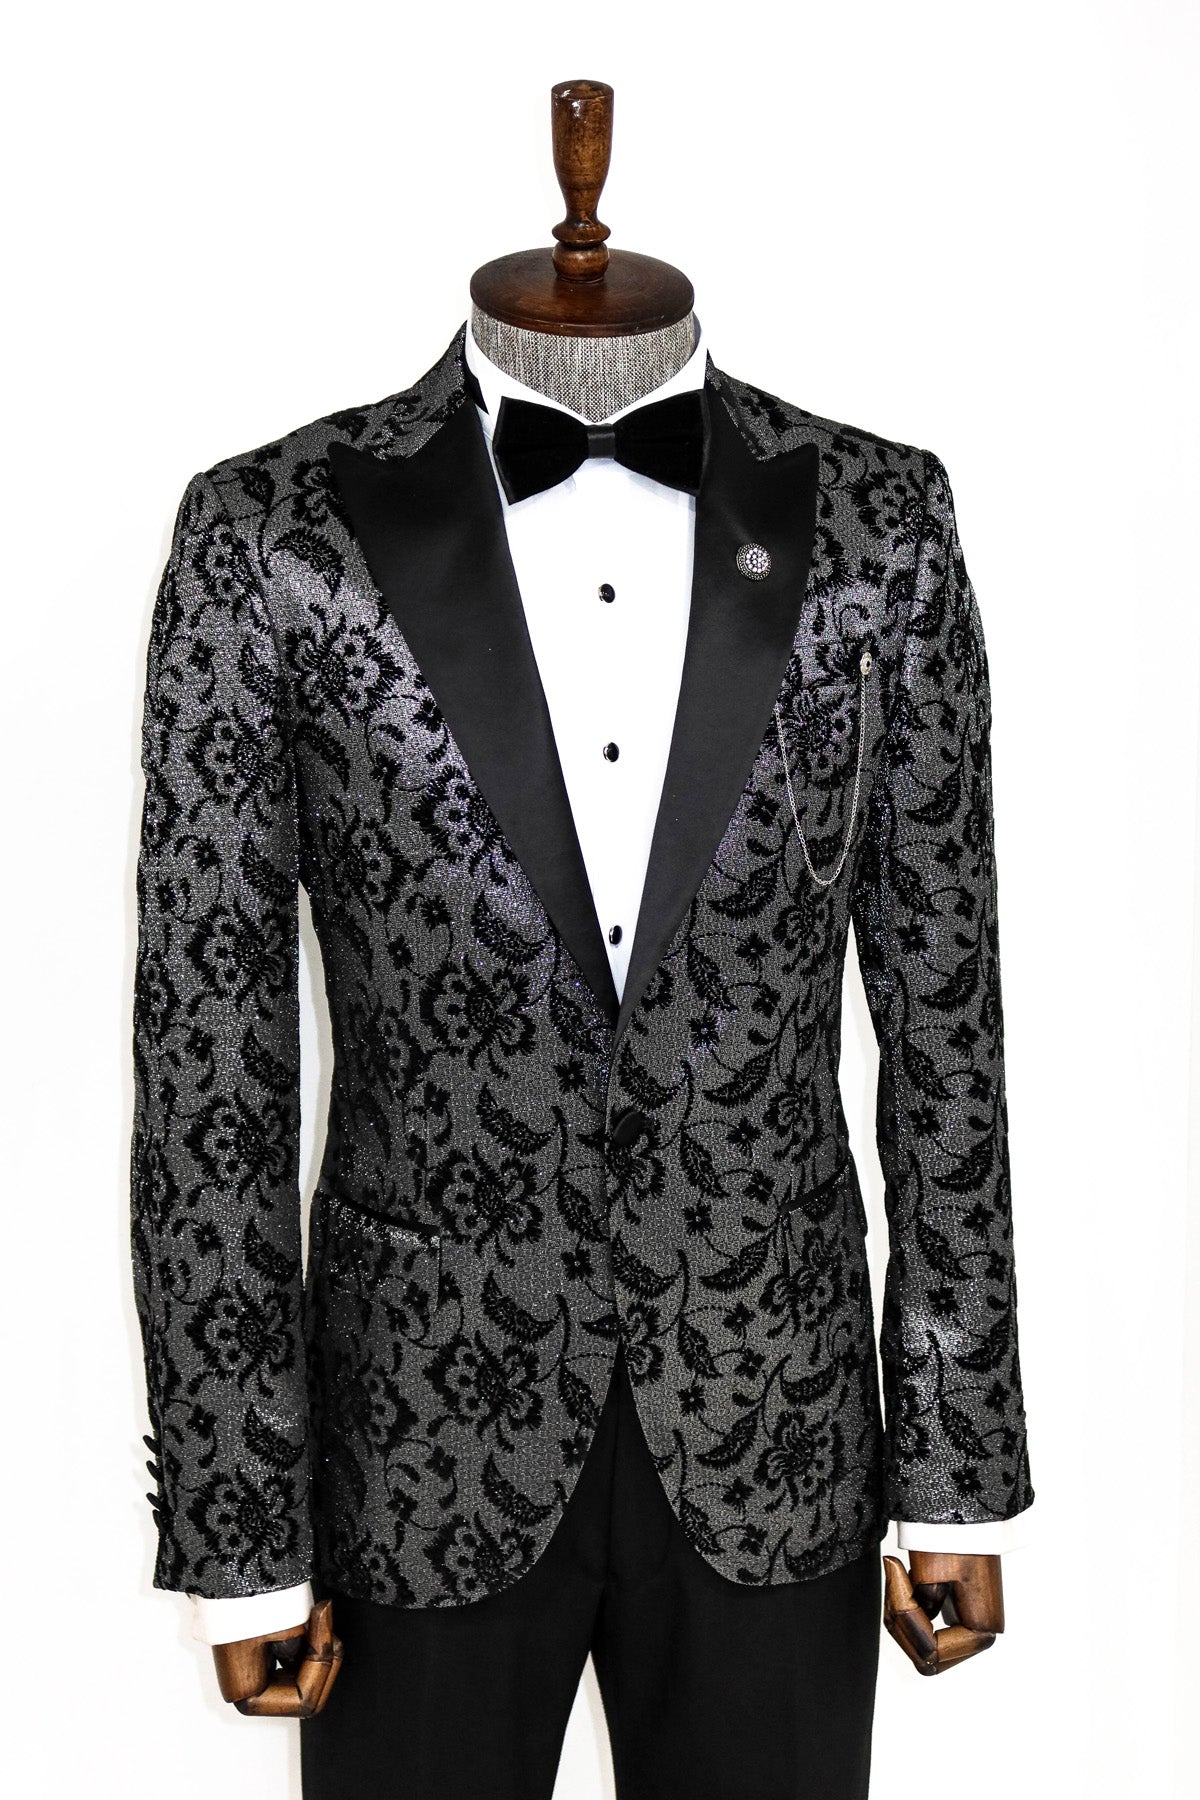 Red Tuxedo with Floral Pattern Four Piece Set - Wedding - Prom | Perfect Tux